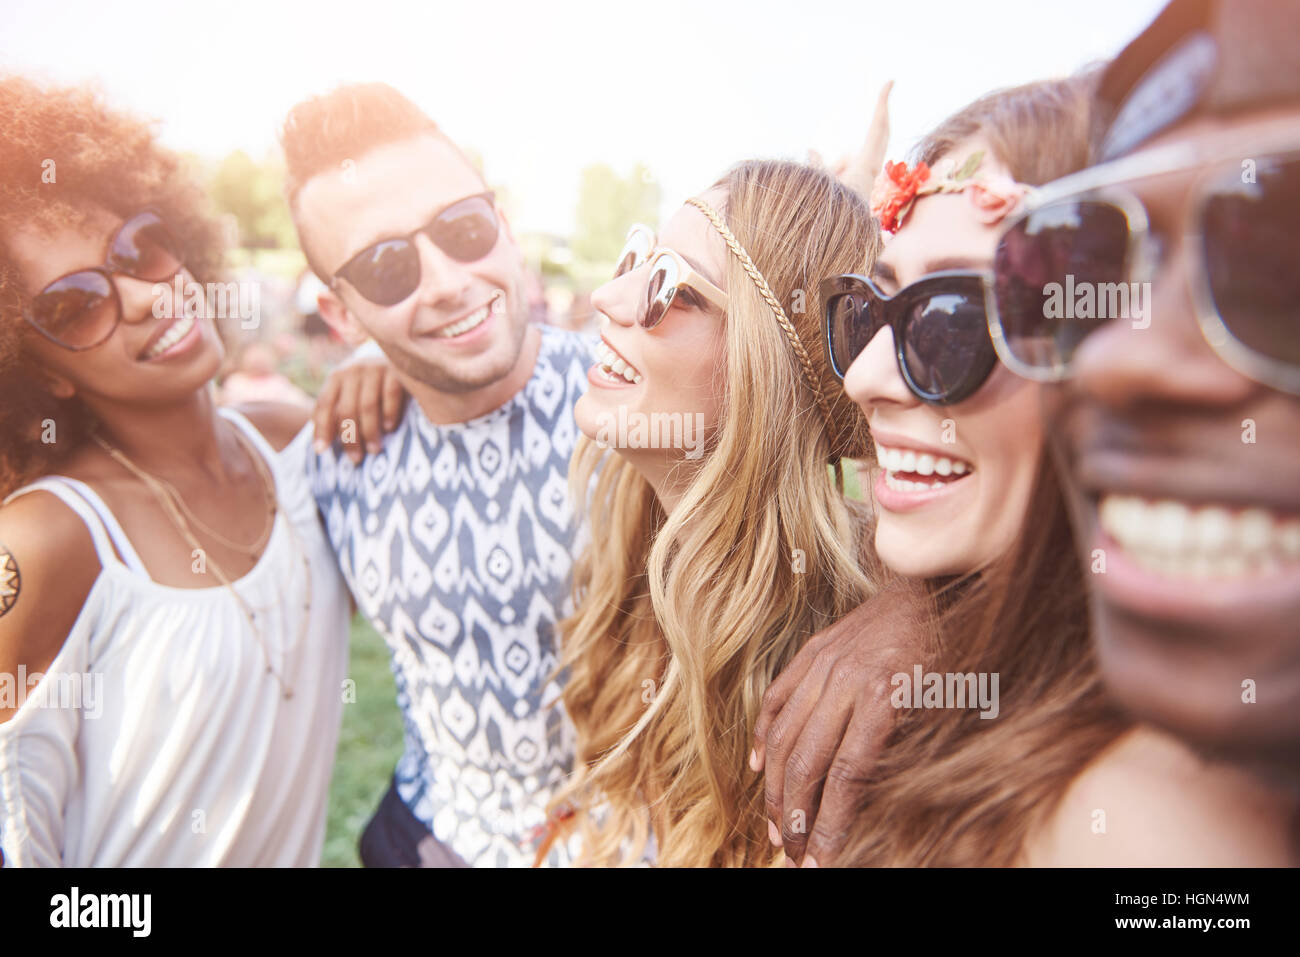 Happy faces of young people Stock Photo